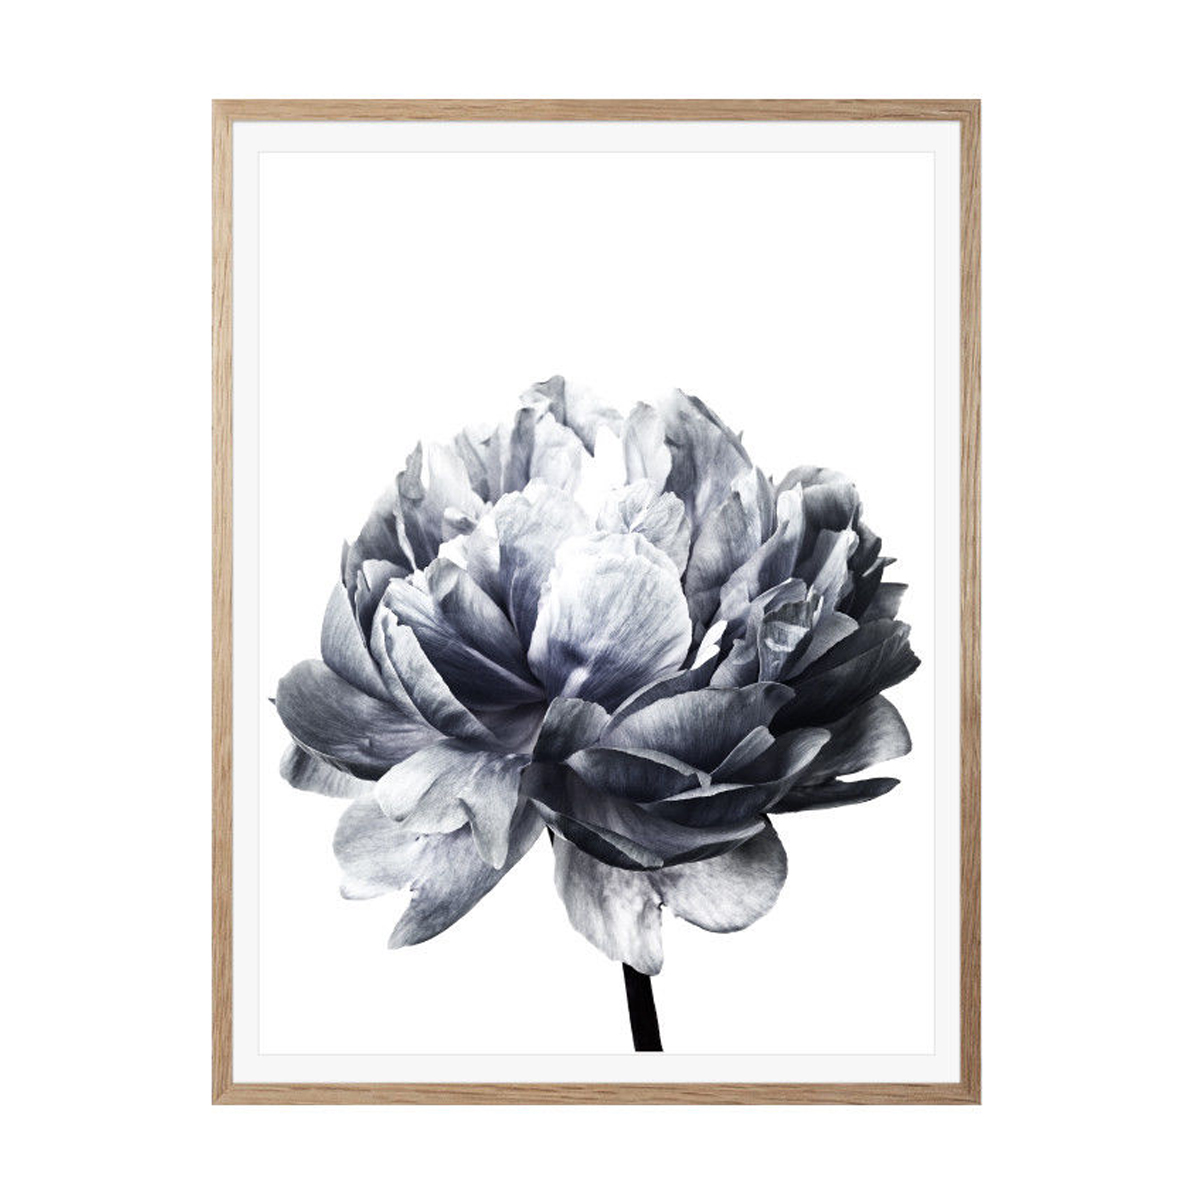 20x3030x40cm-Flower-Modern-Wall-Art-Canvas-Paintings-Picture-Home-Decor-Mural-Poster-with-Frame-1632681-5